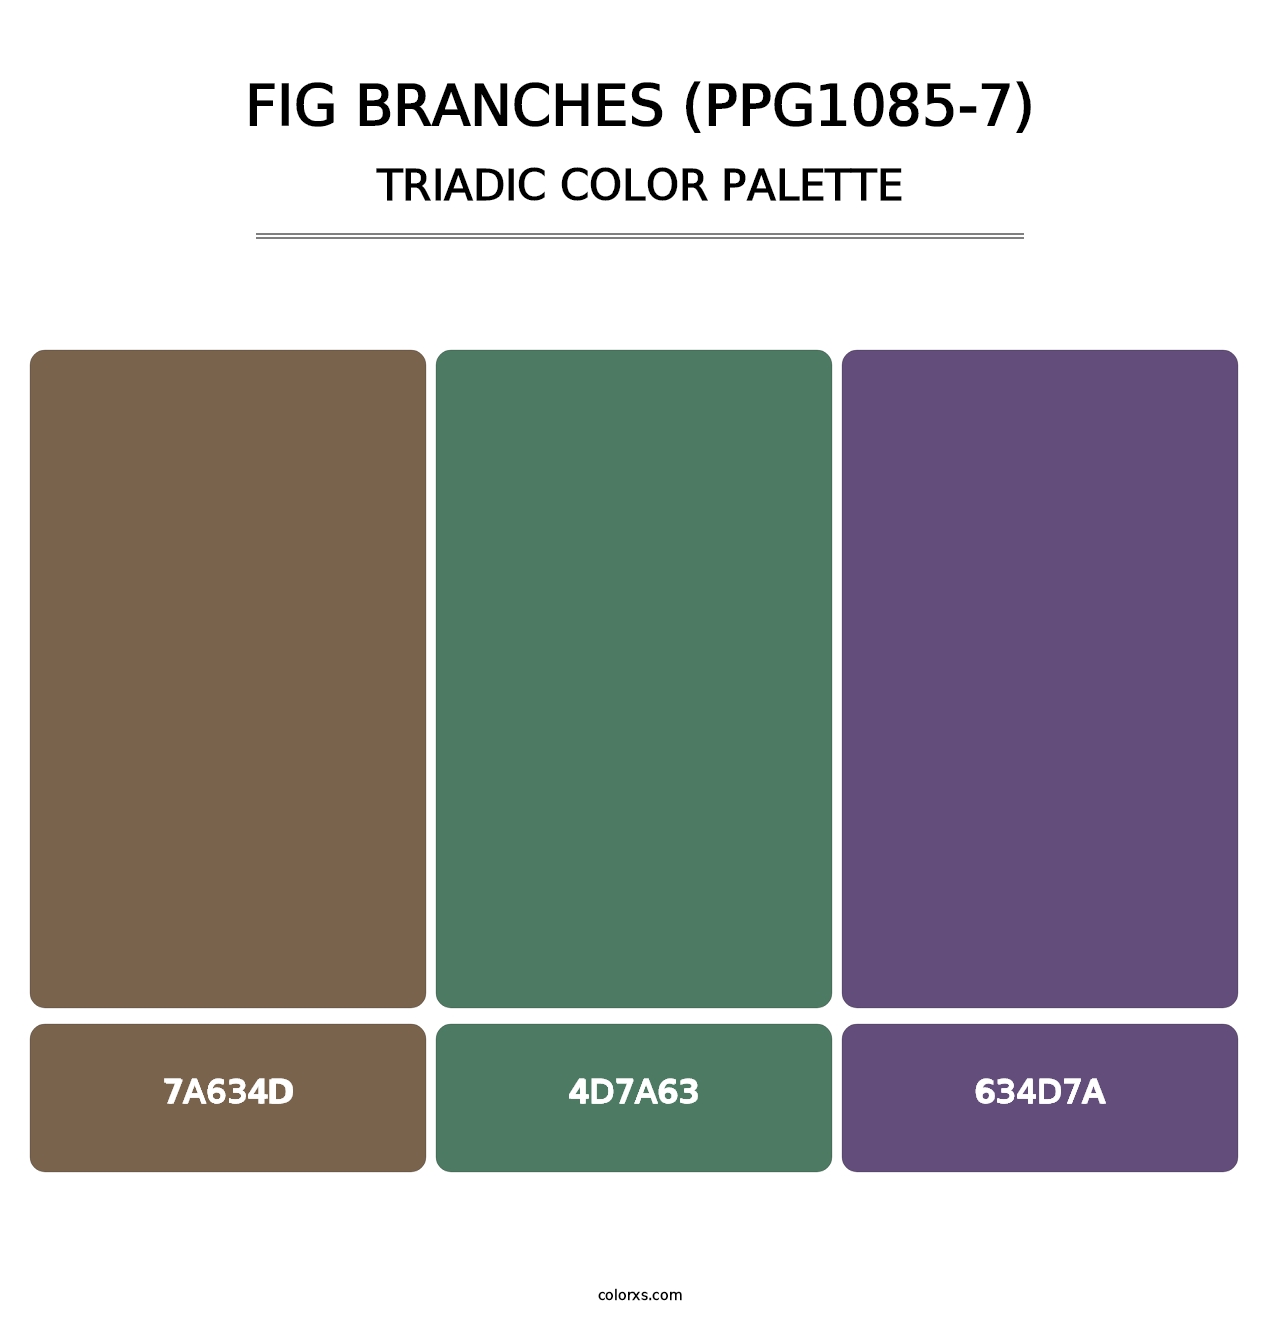 Fig Branches (PPG1085-7) - Triadic Color Palette